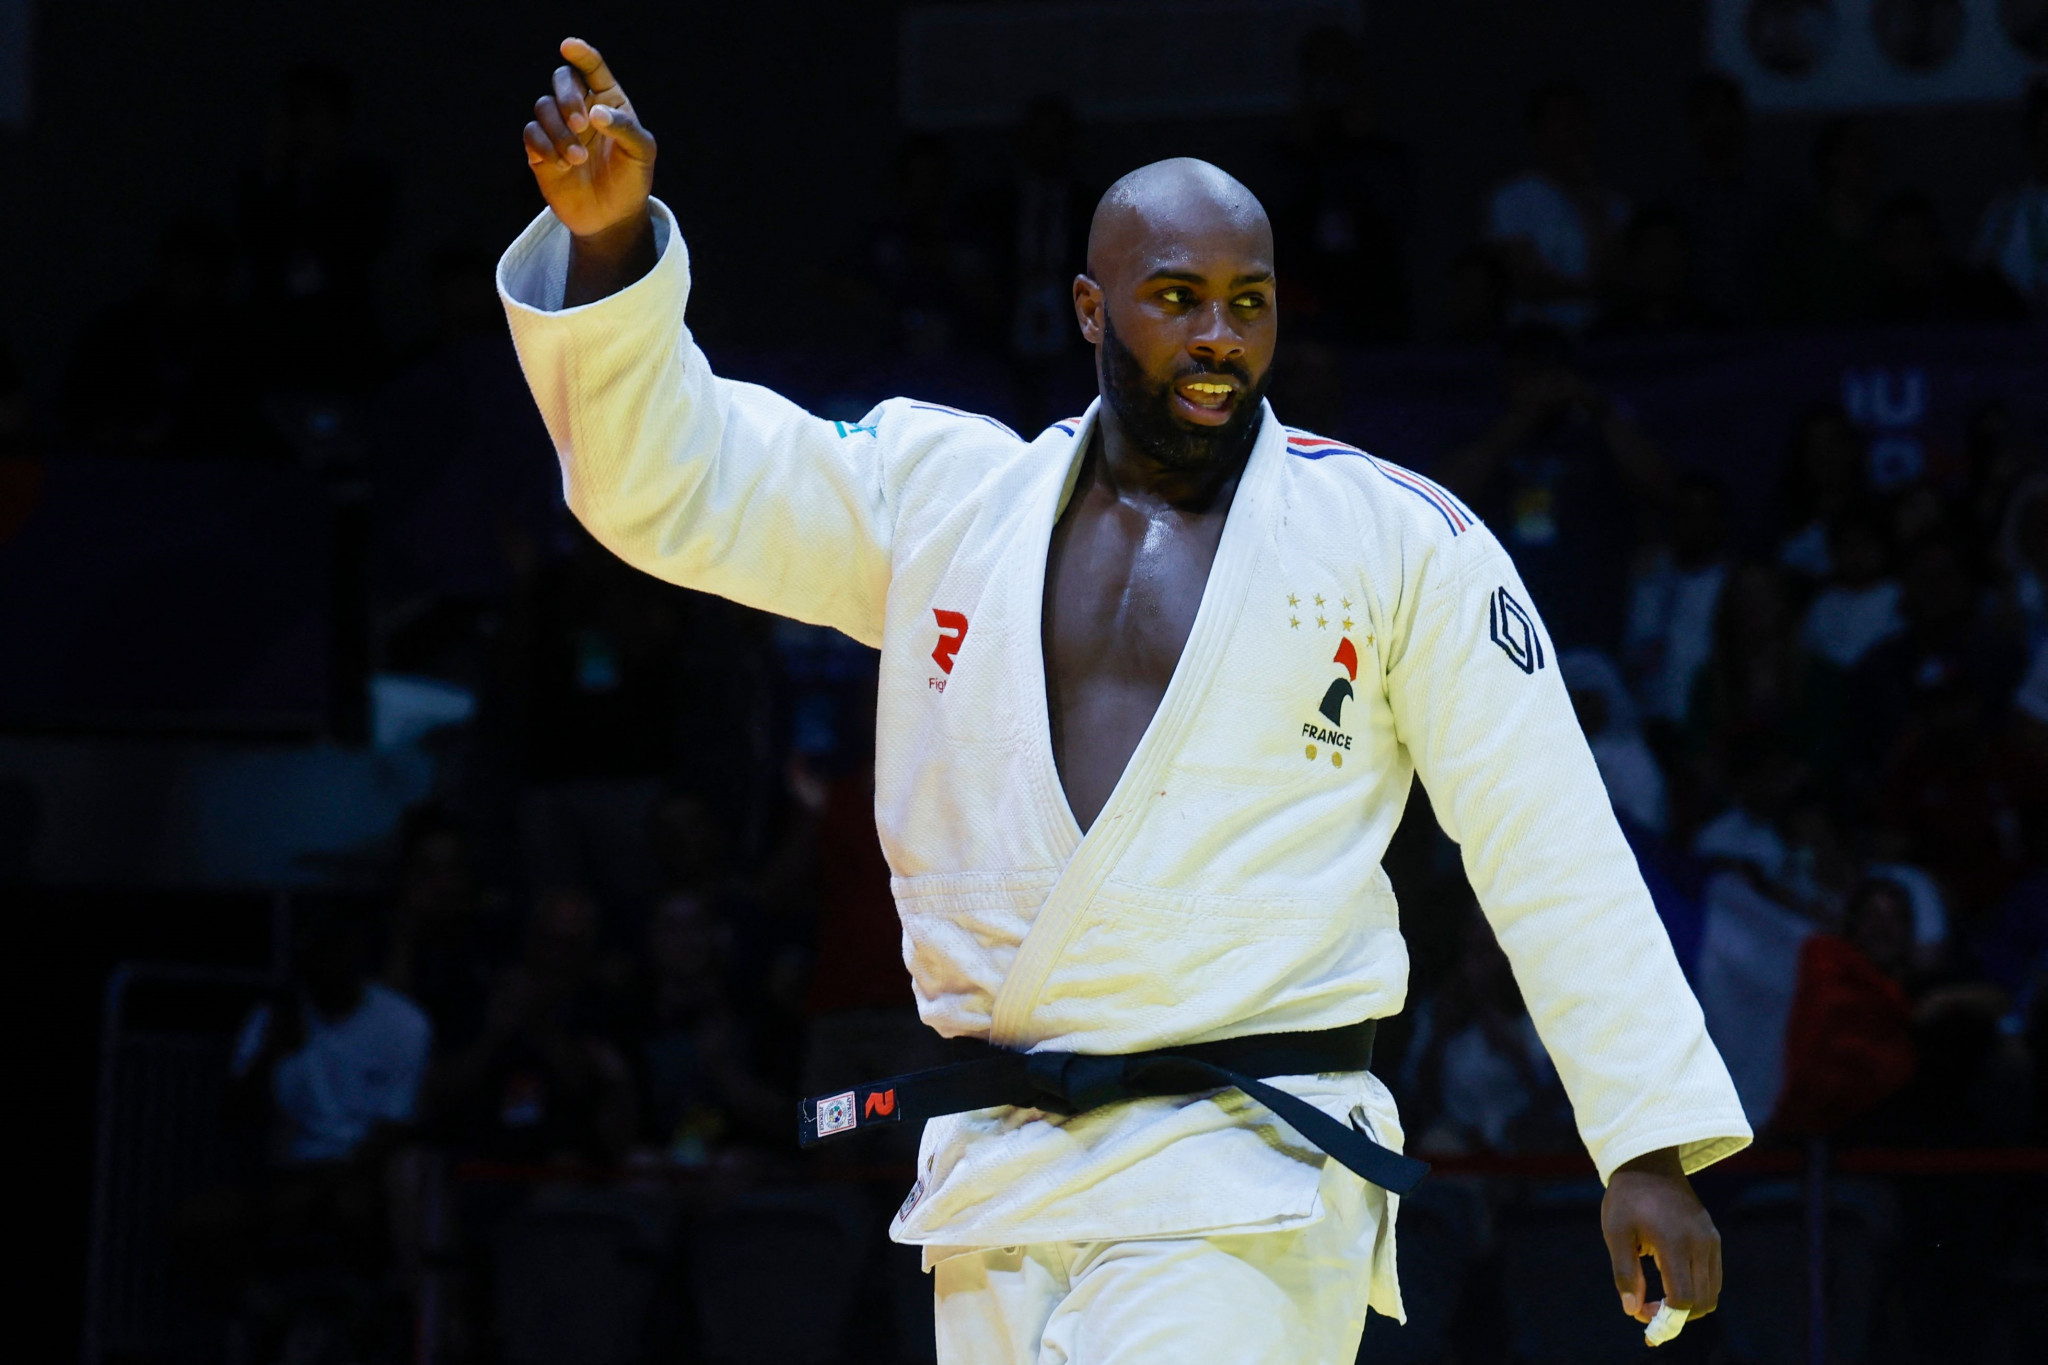 Riner captures 11th world judo title with dramatic victory in Doha